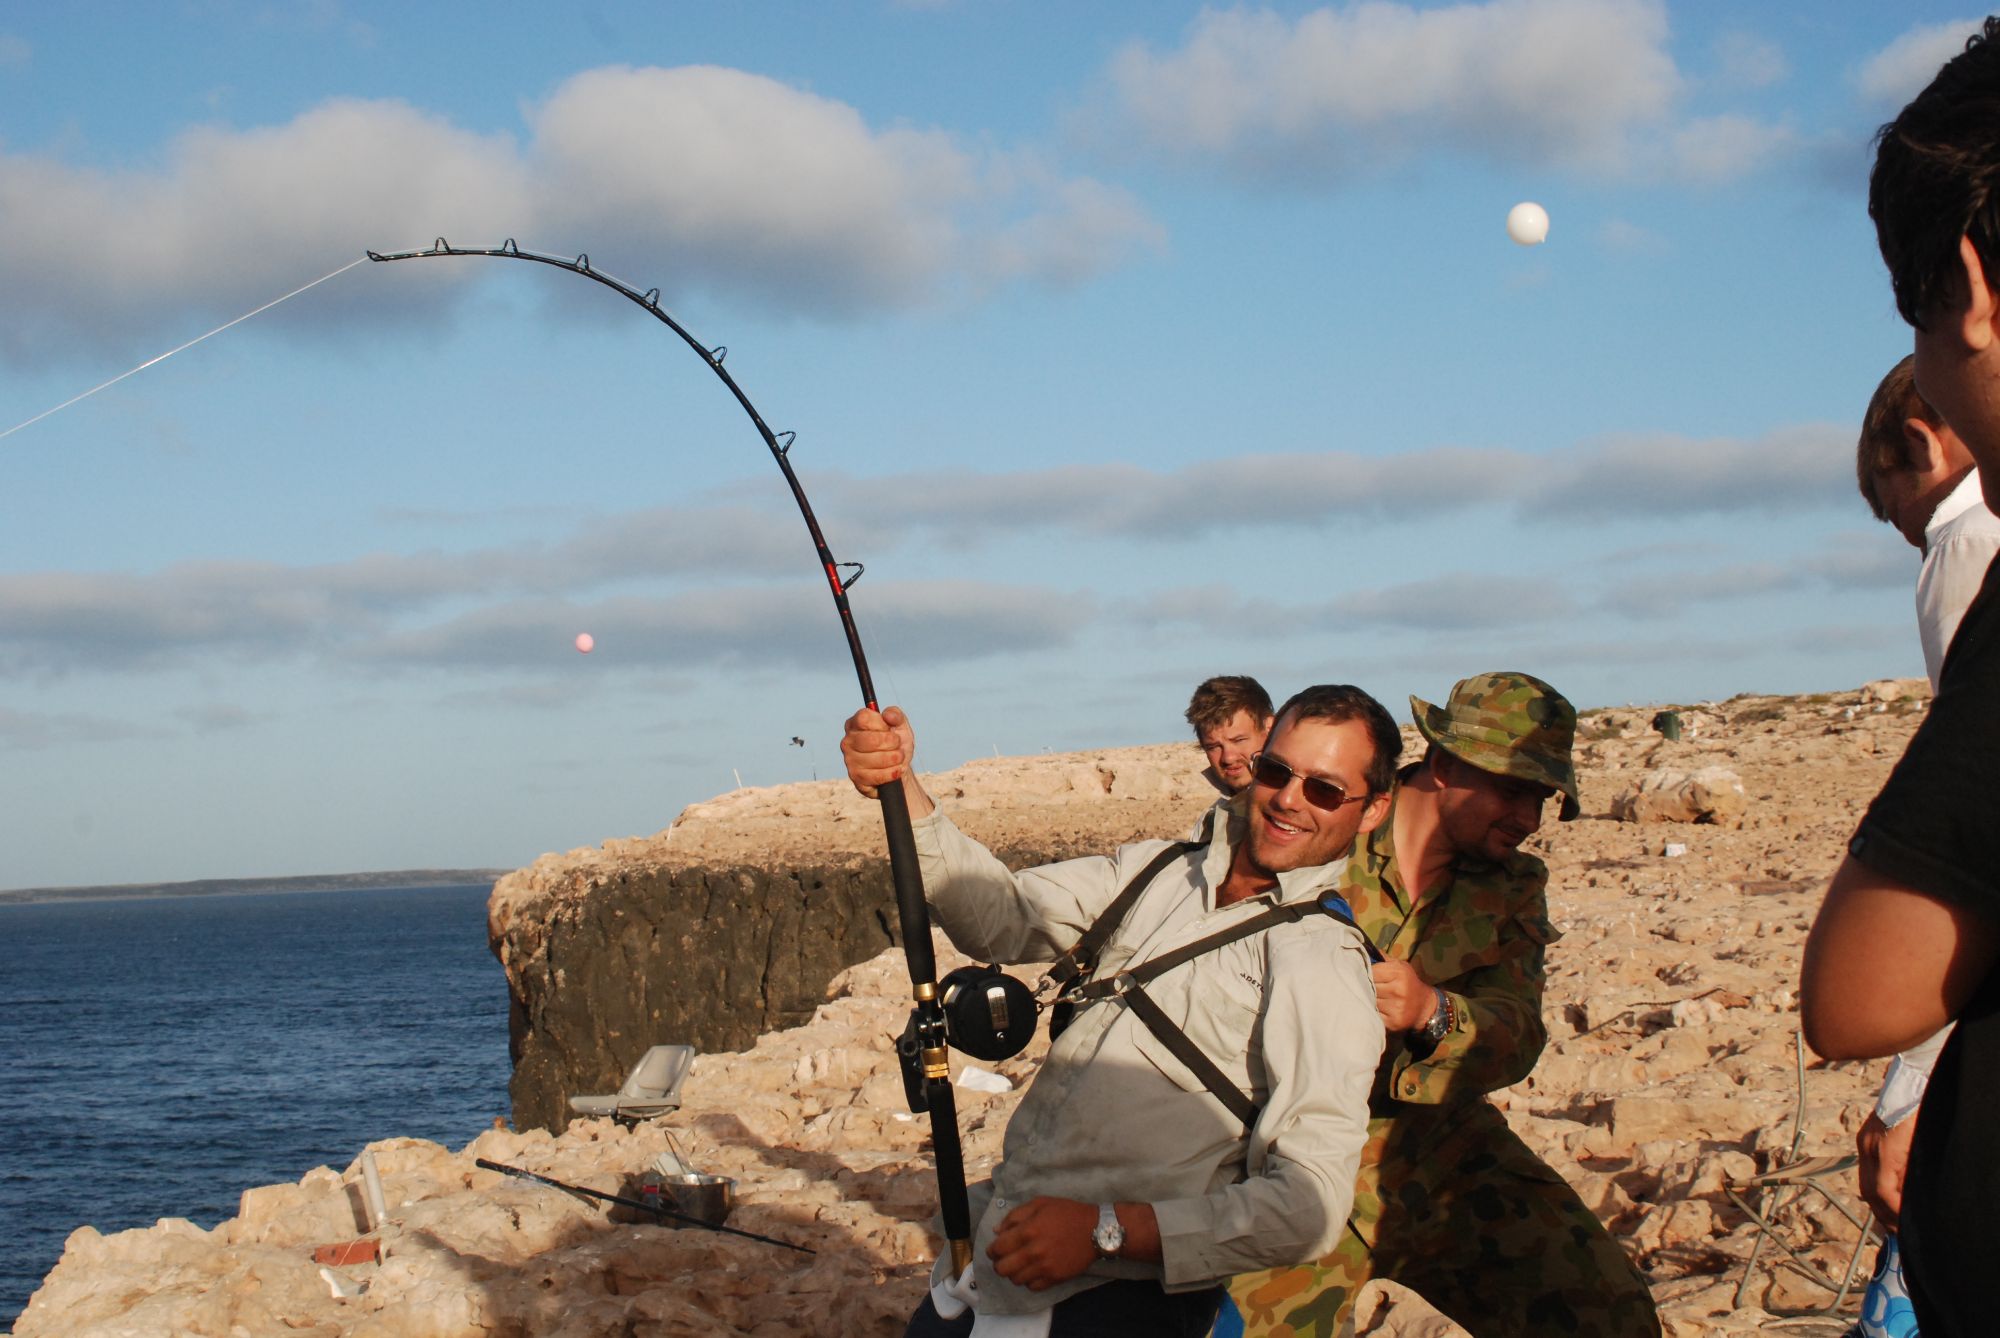 Fishing Product Suppliers in Perth, Western Australia